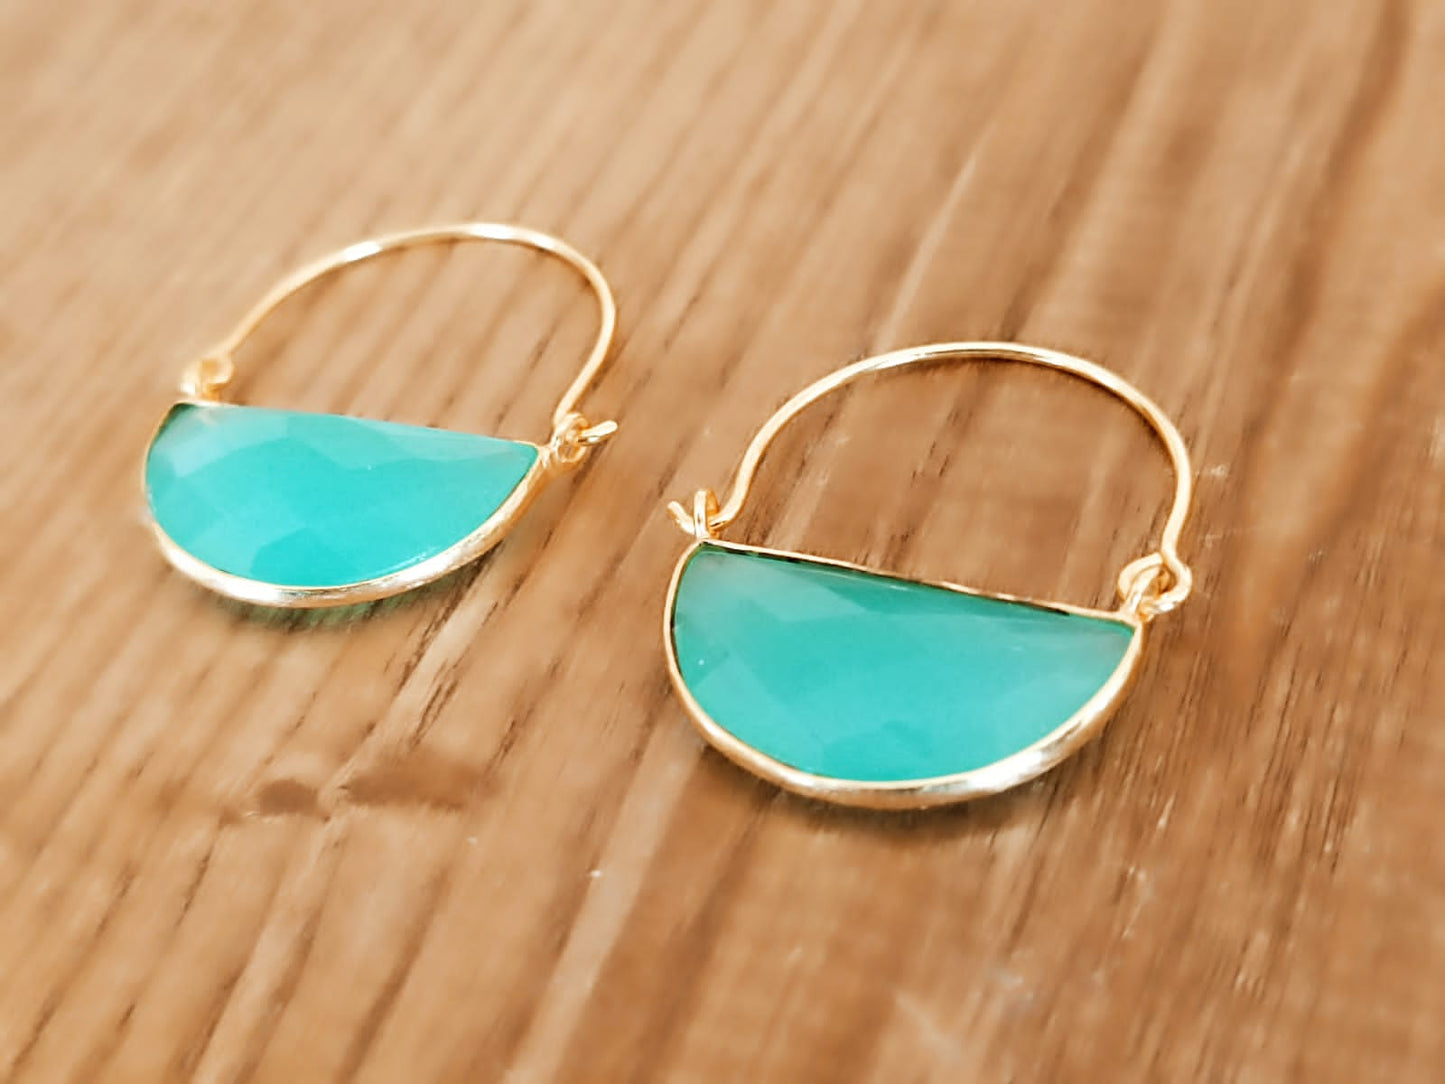 Aqua chalcydony hoops,

Sterling silver with 1 micron gold plating.